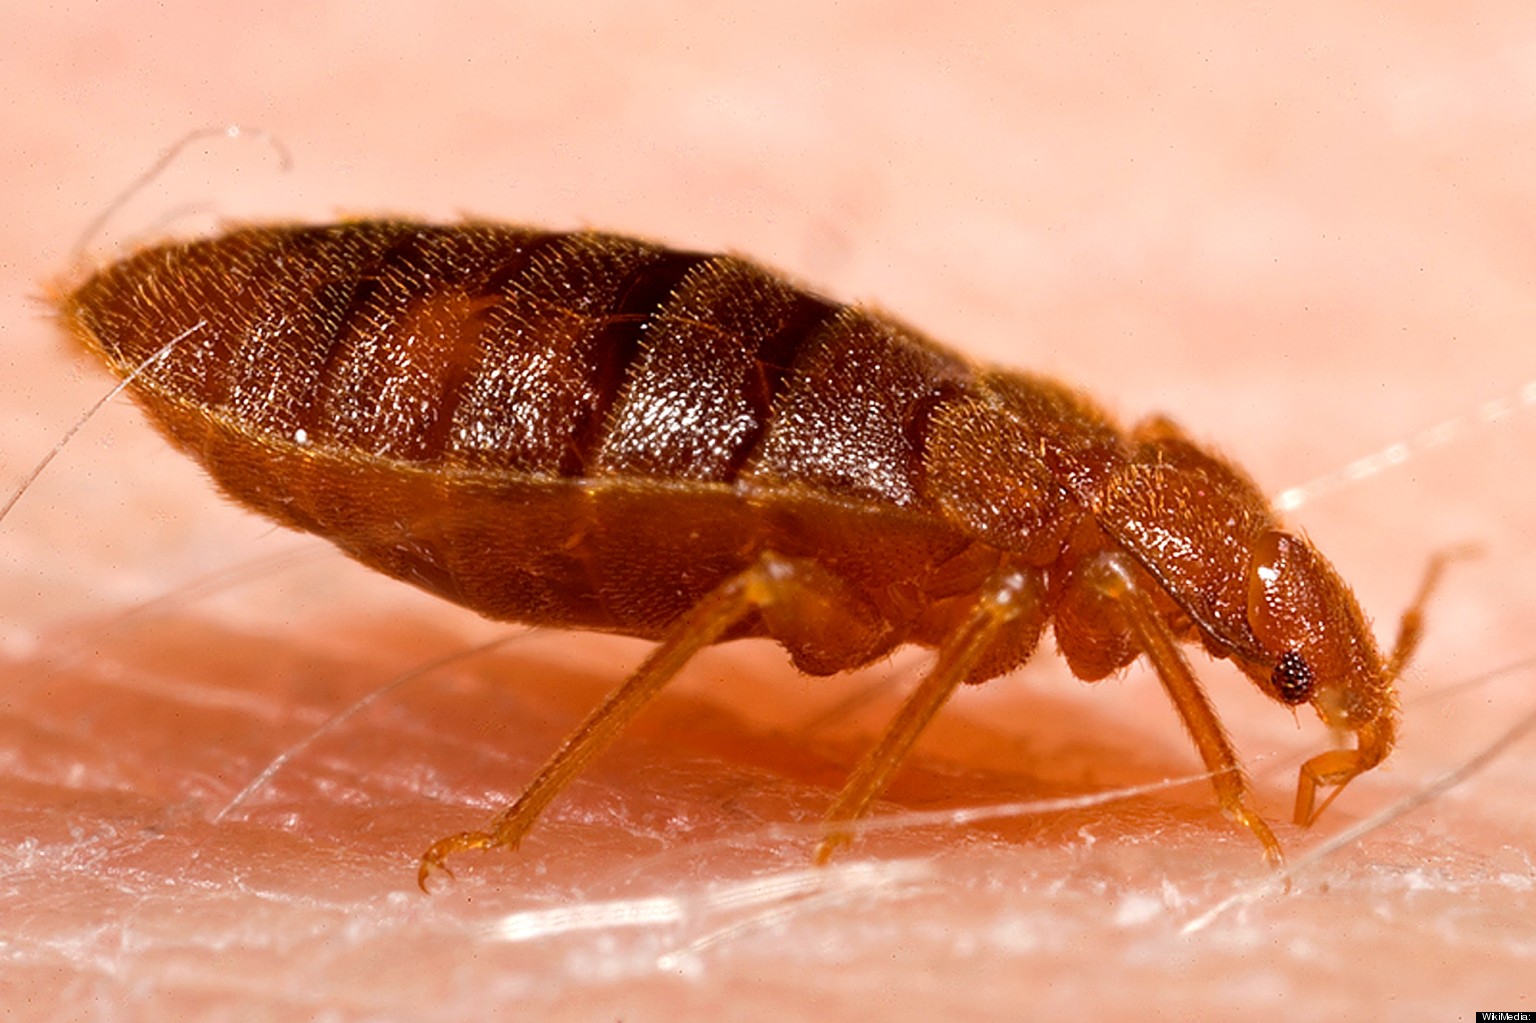 Bed Bugs In Alberta Seniors Homes; Officials Say No Reason For Concern